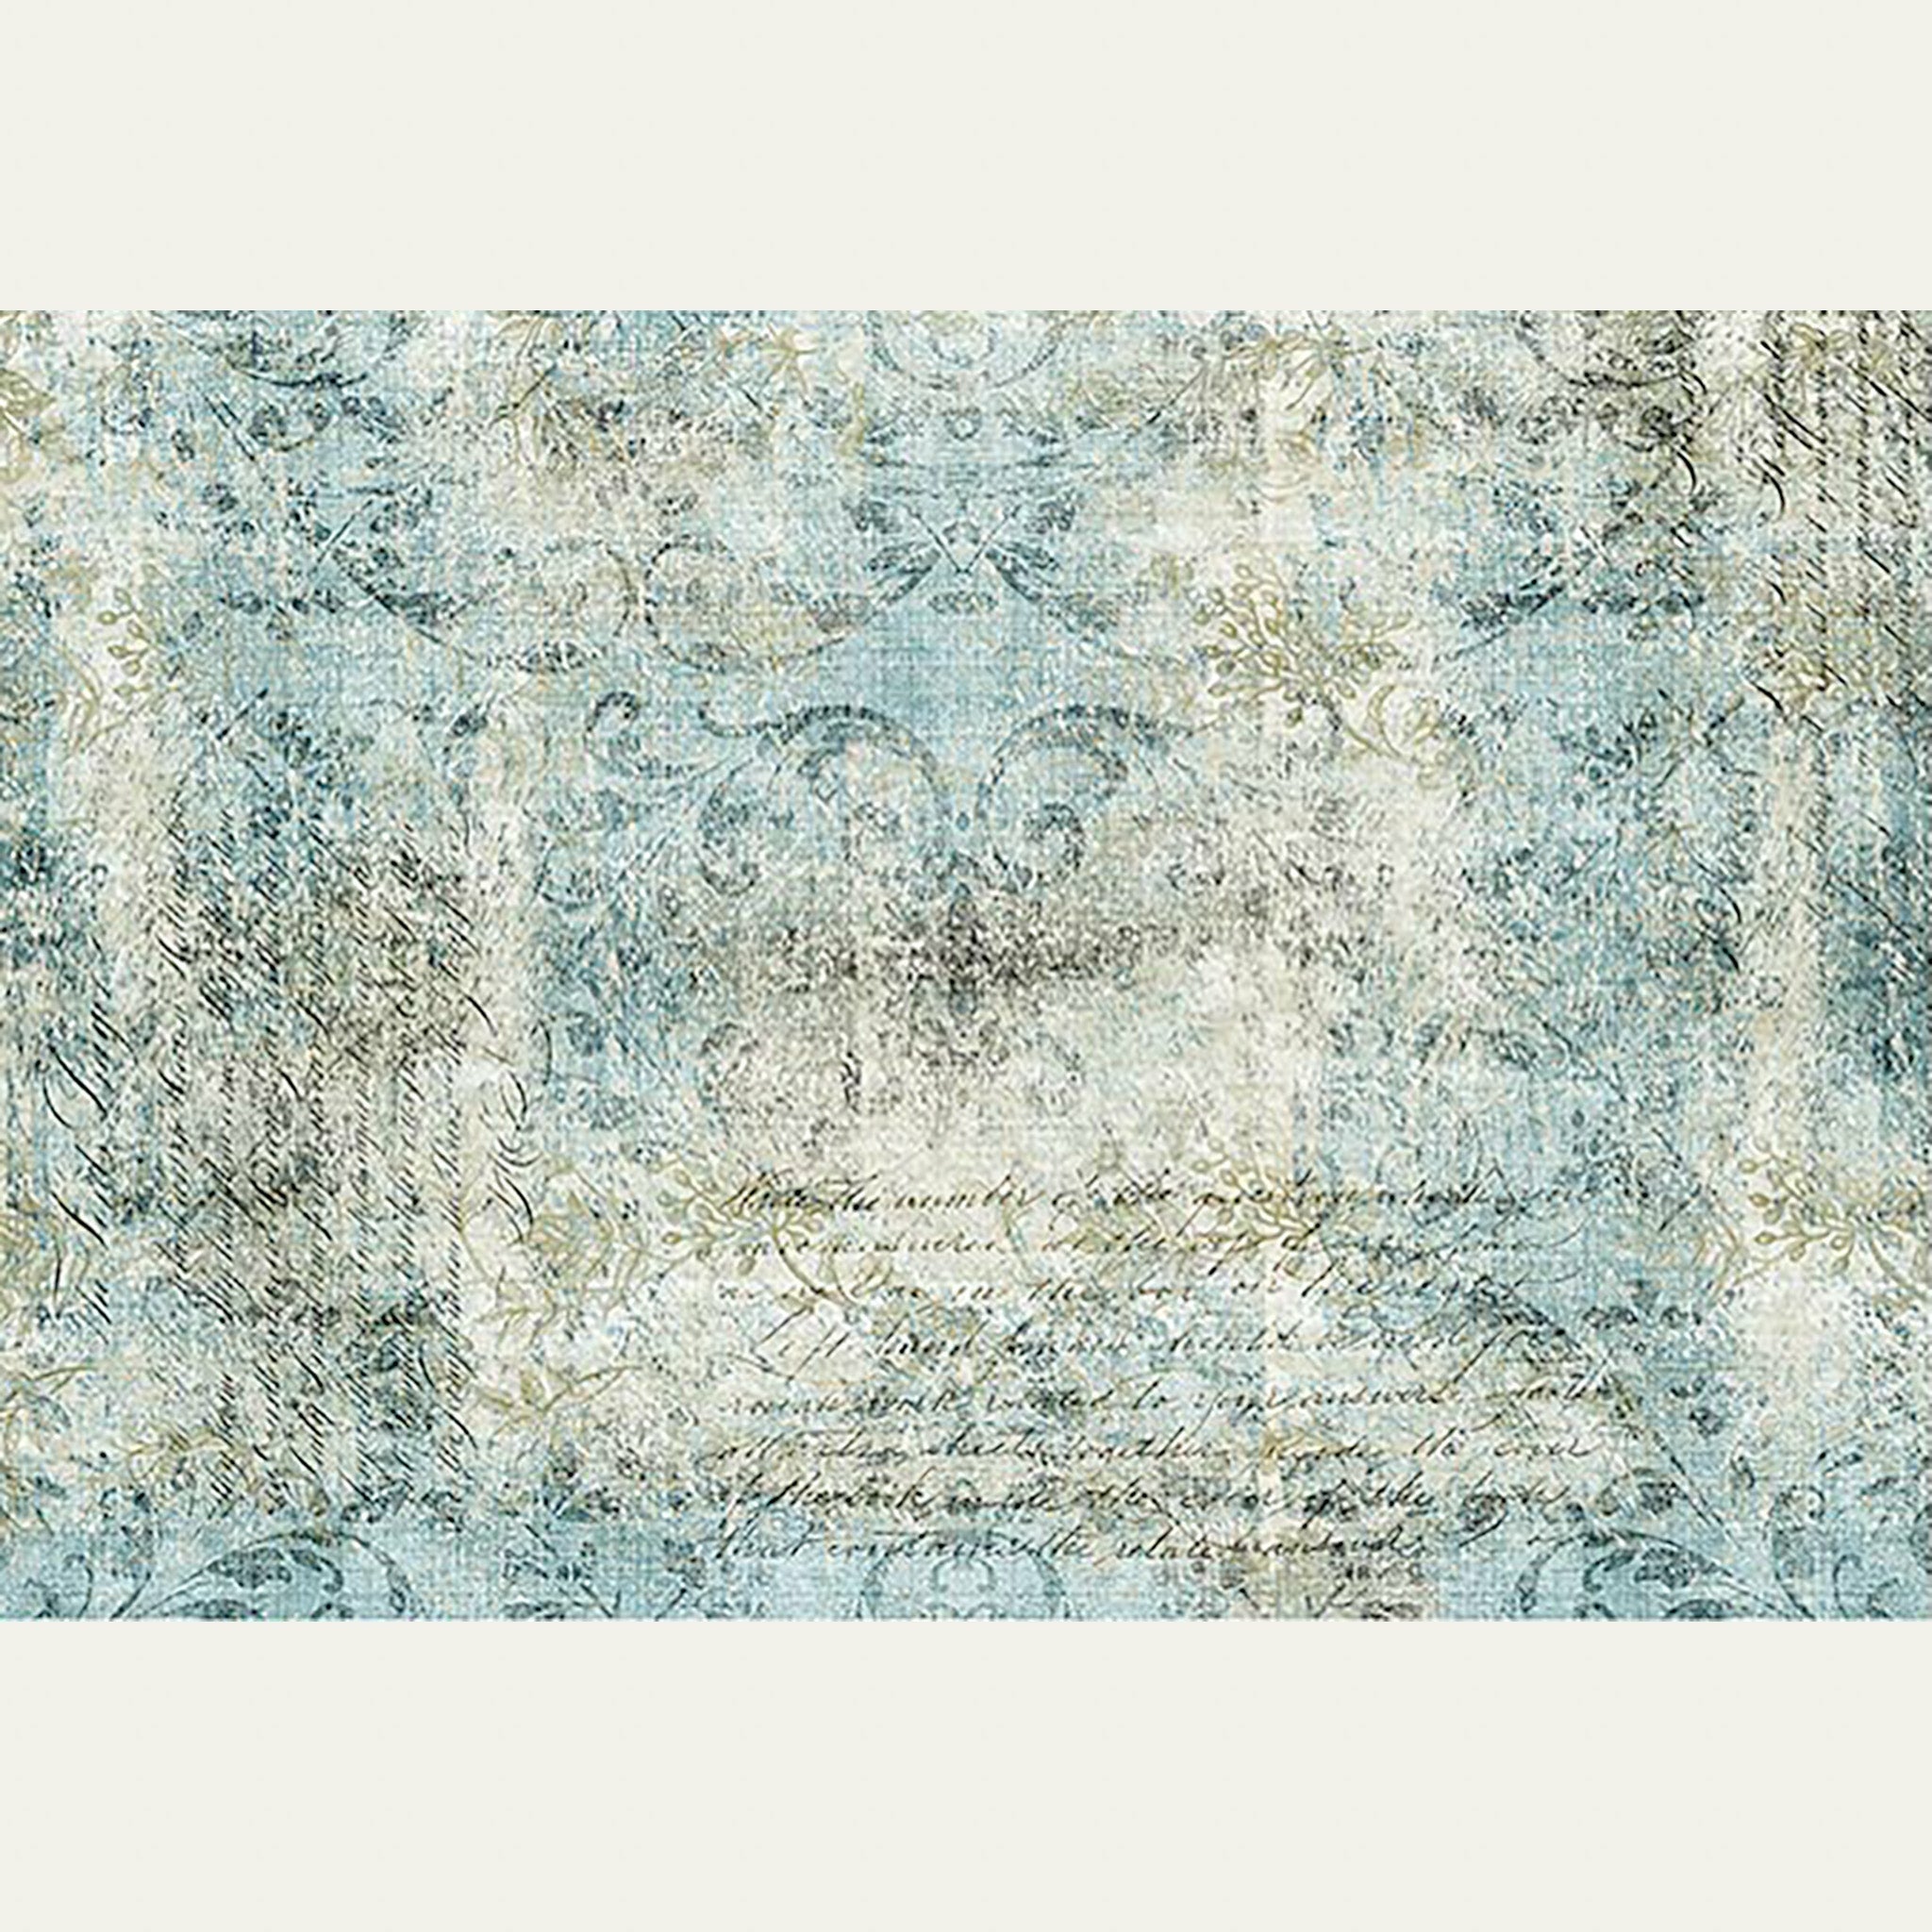 A1 rice decoupage paper of a faded light blue and cream colored fabric that has a worn damask scroll design and script writing. Soft white borders on the top and bottom.